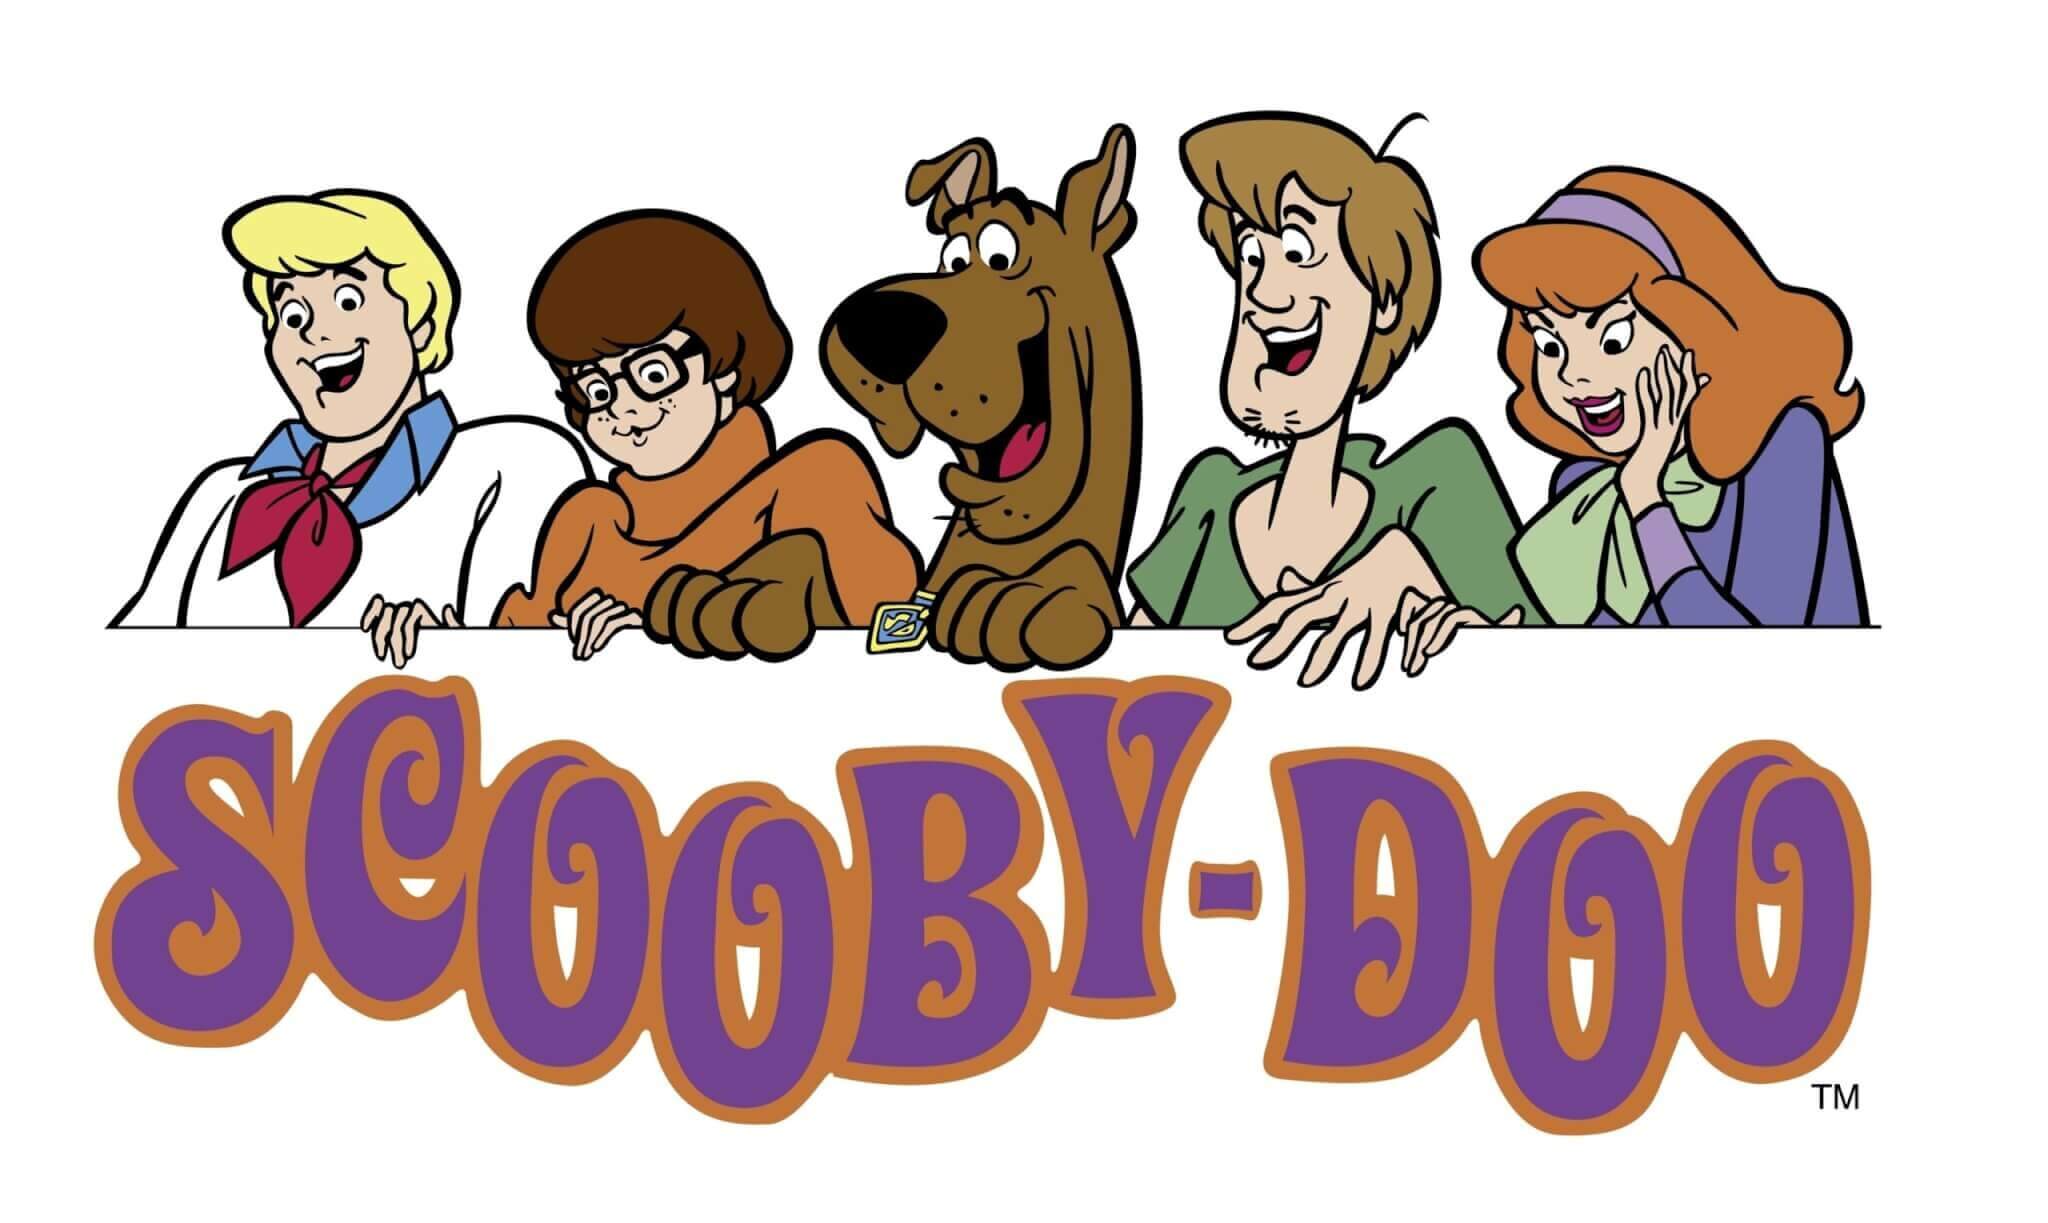 "Scooby-Doo" logo and characters